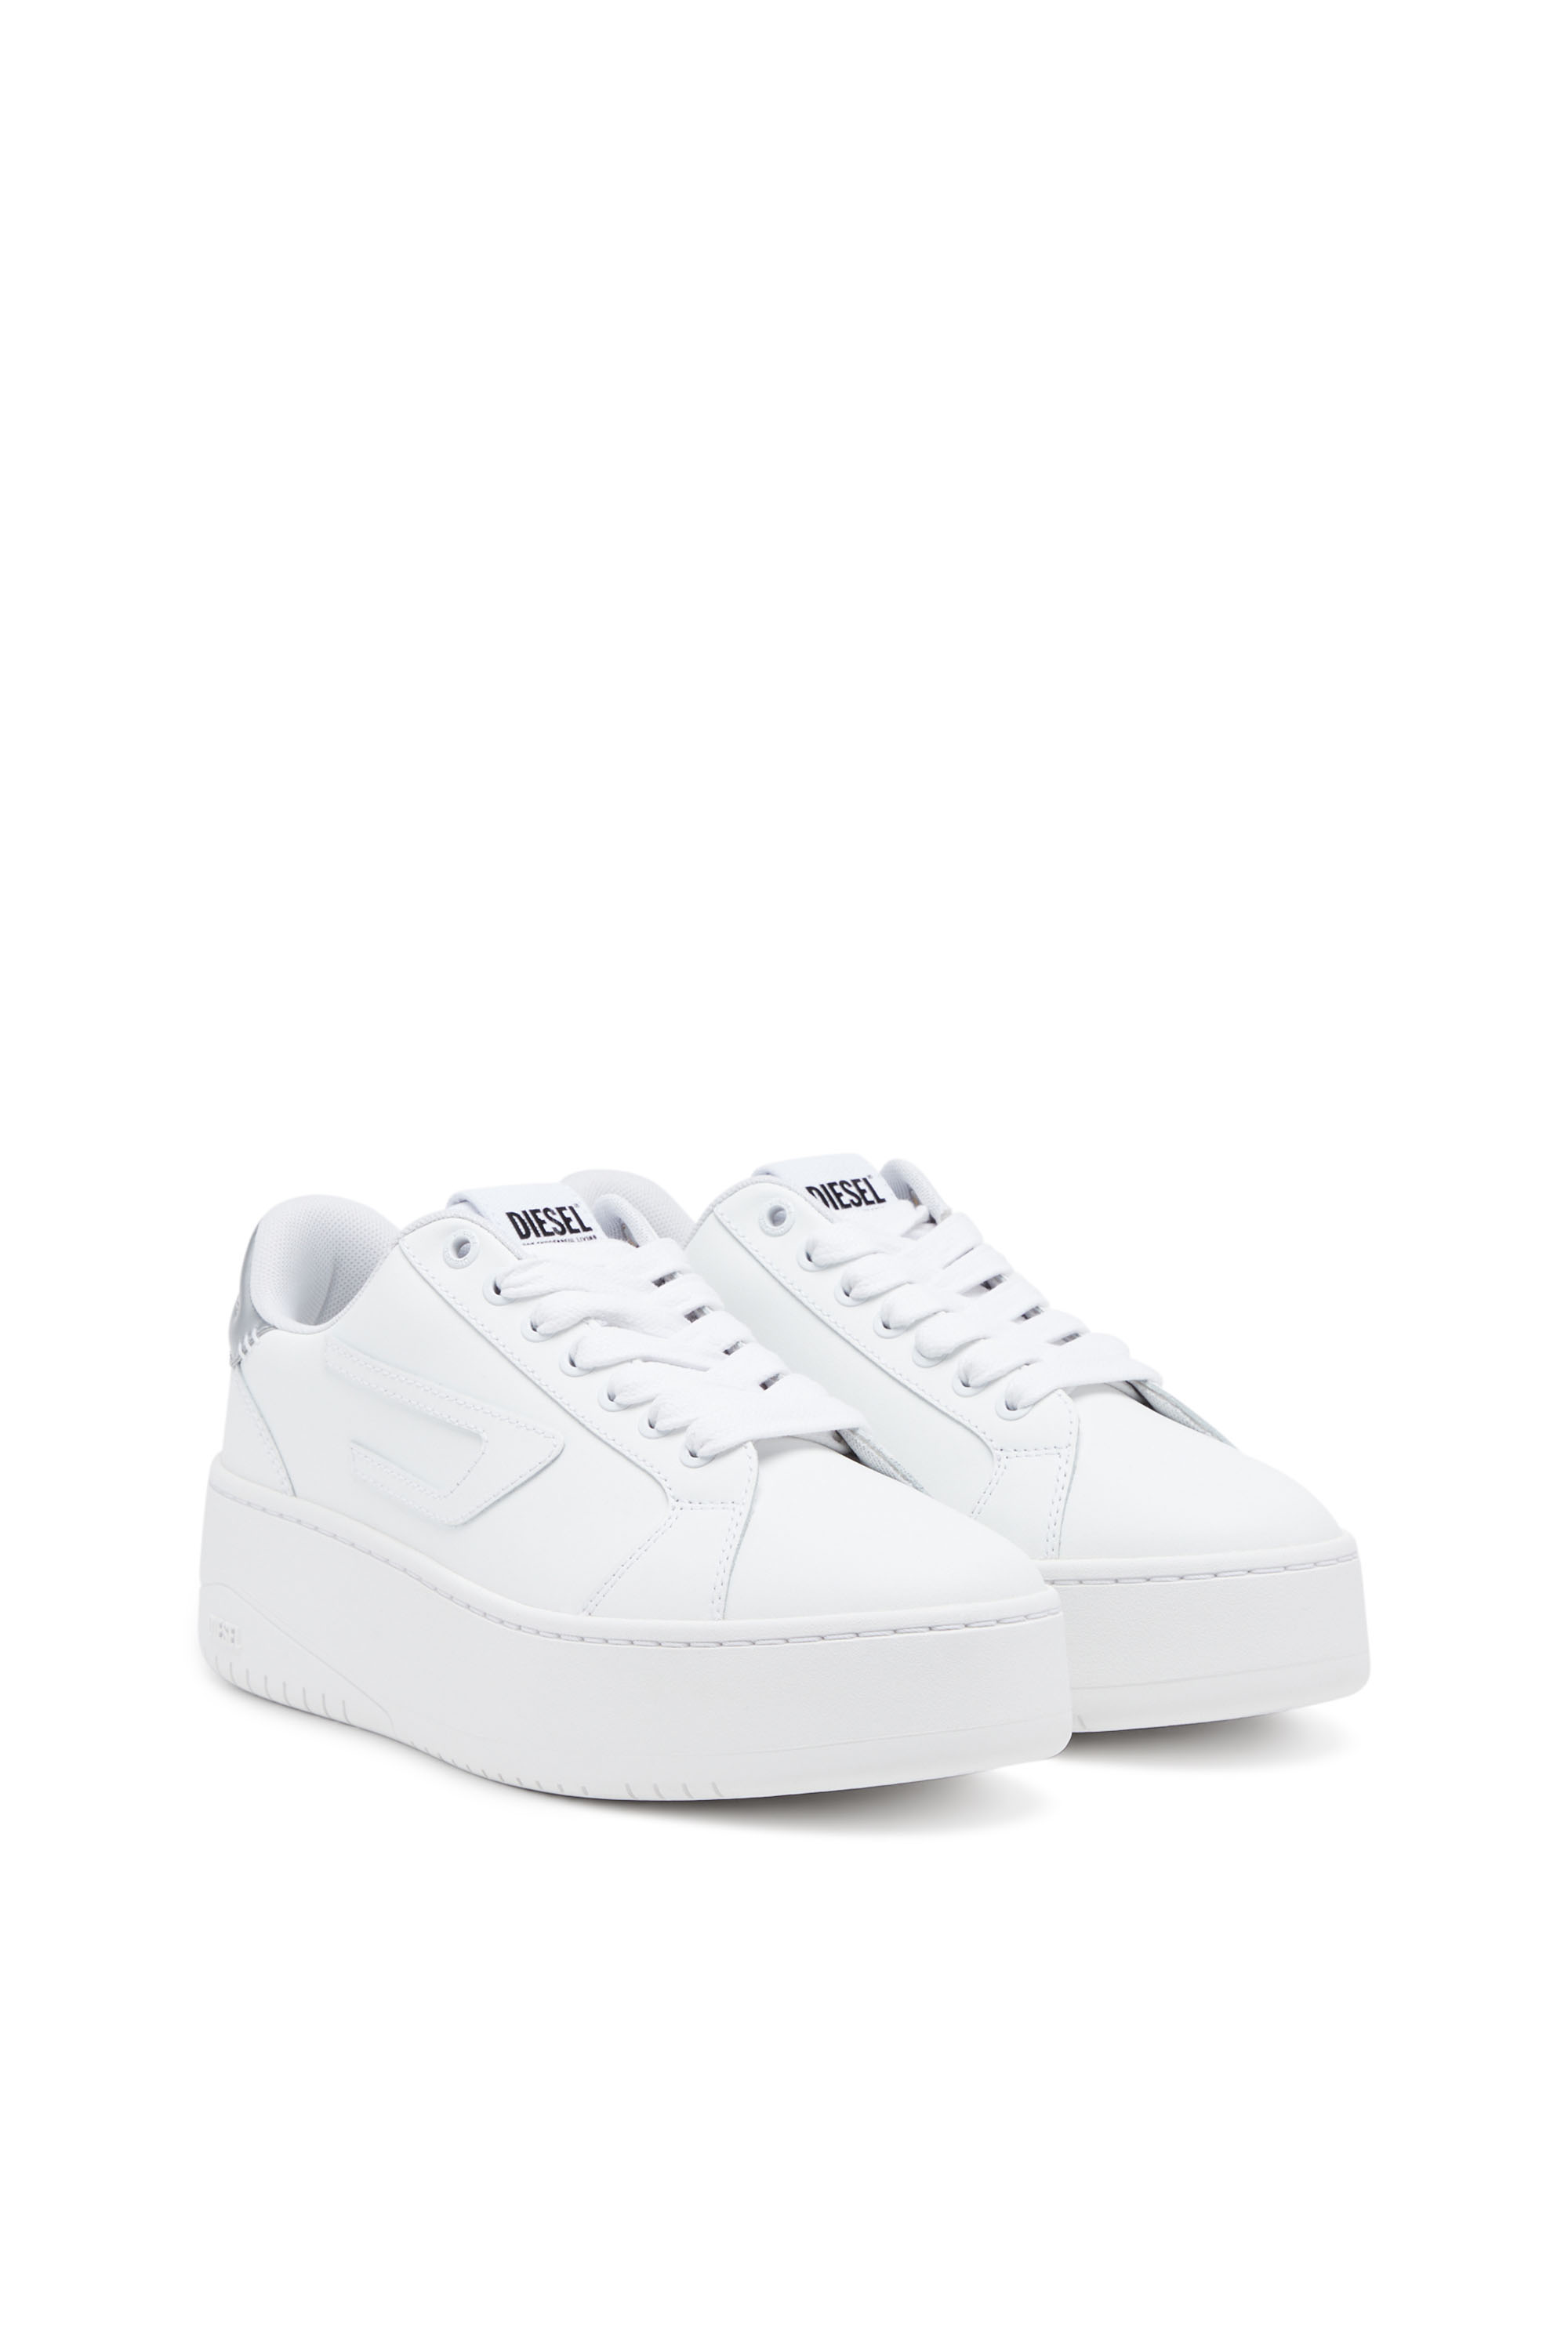 Diesel - S-ATHENE BOLD W, Female S-Athene Bold-Low-top sneakers with flatform sole in White - Image 2